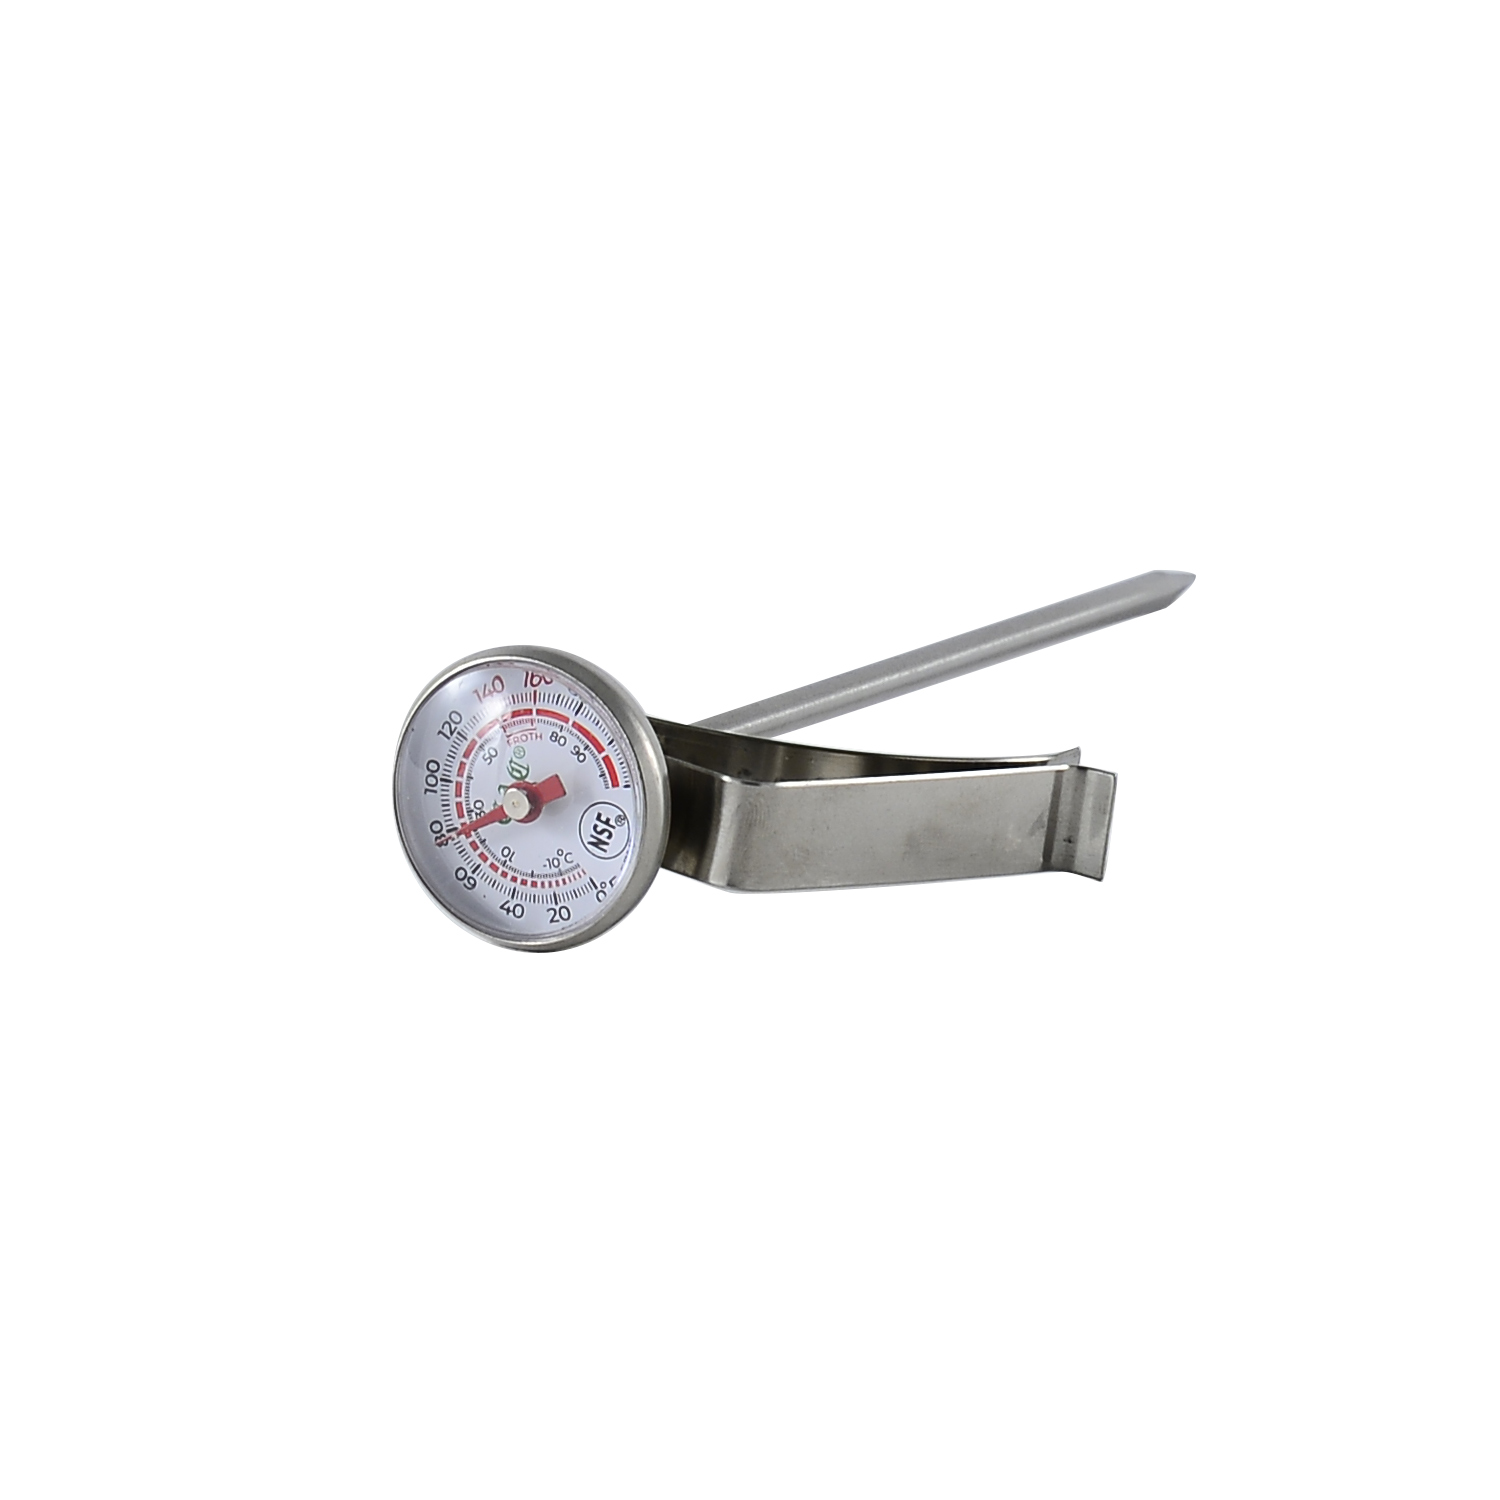 CAC China FPMT-F8 Equil Thermo Frothing Thermometer, 1" Dial